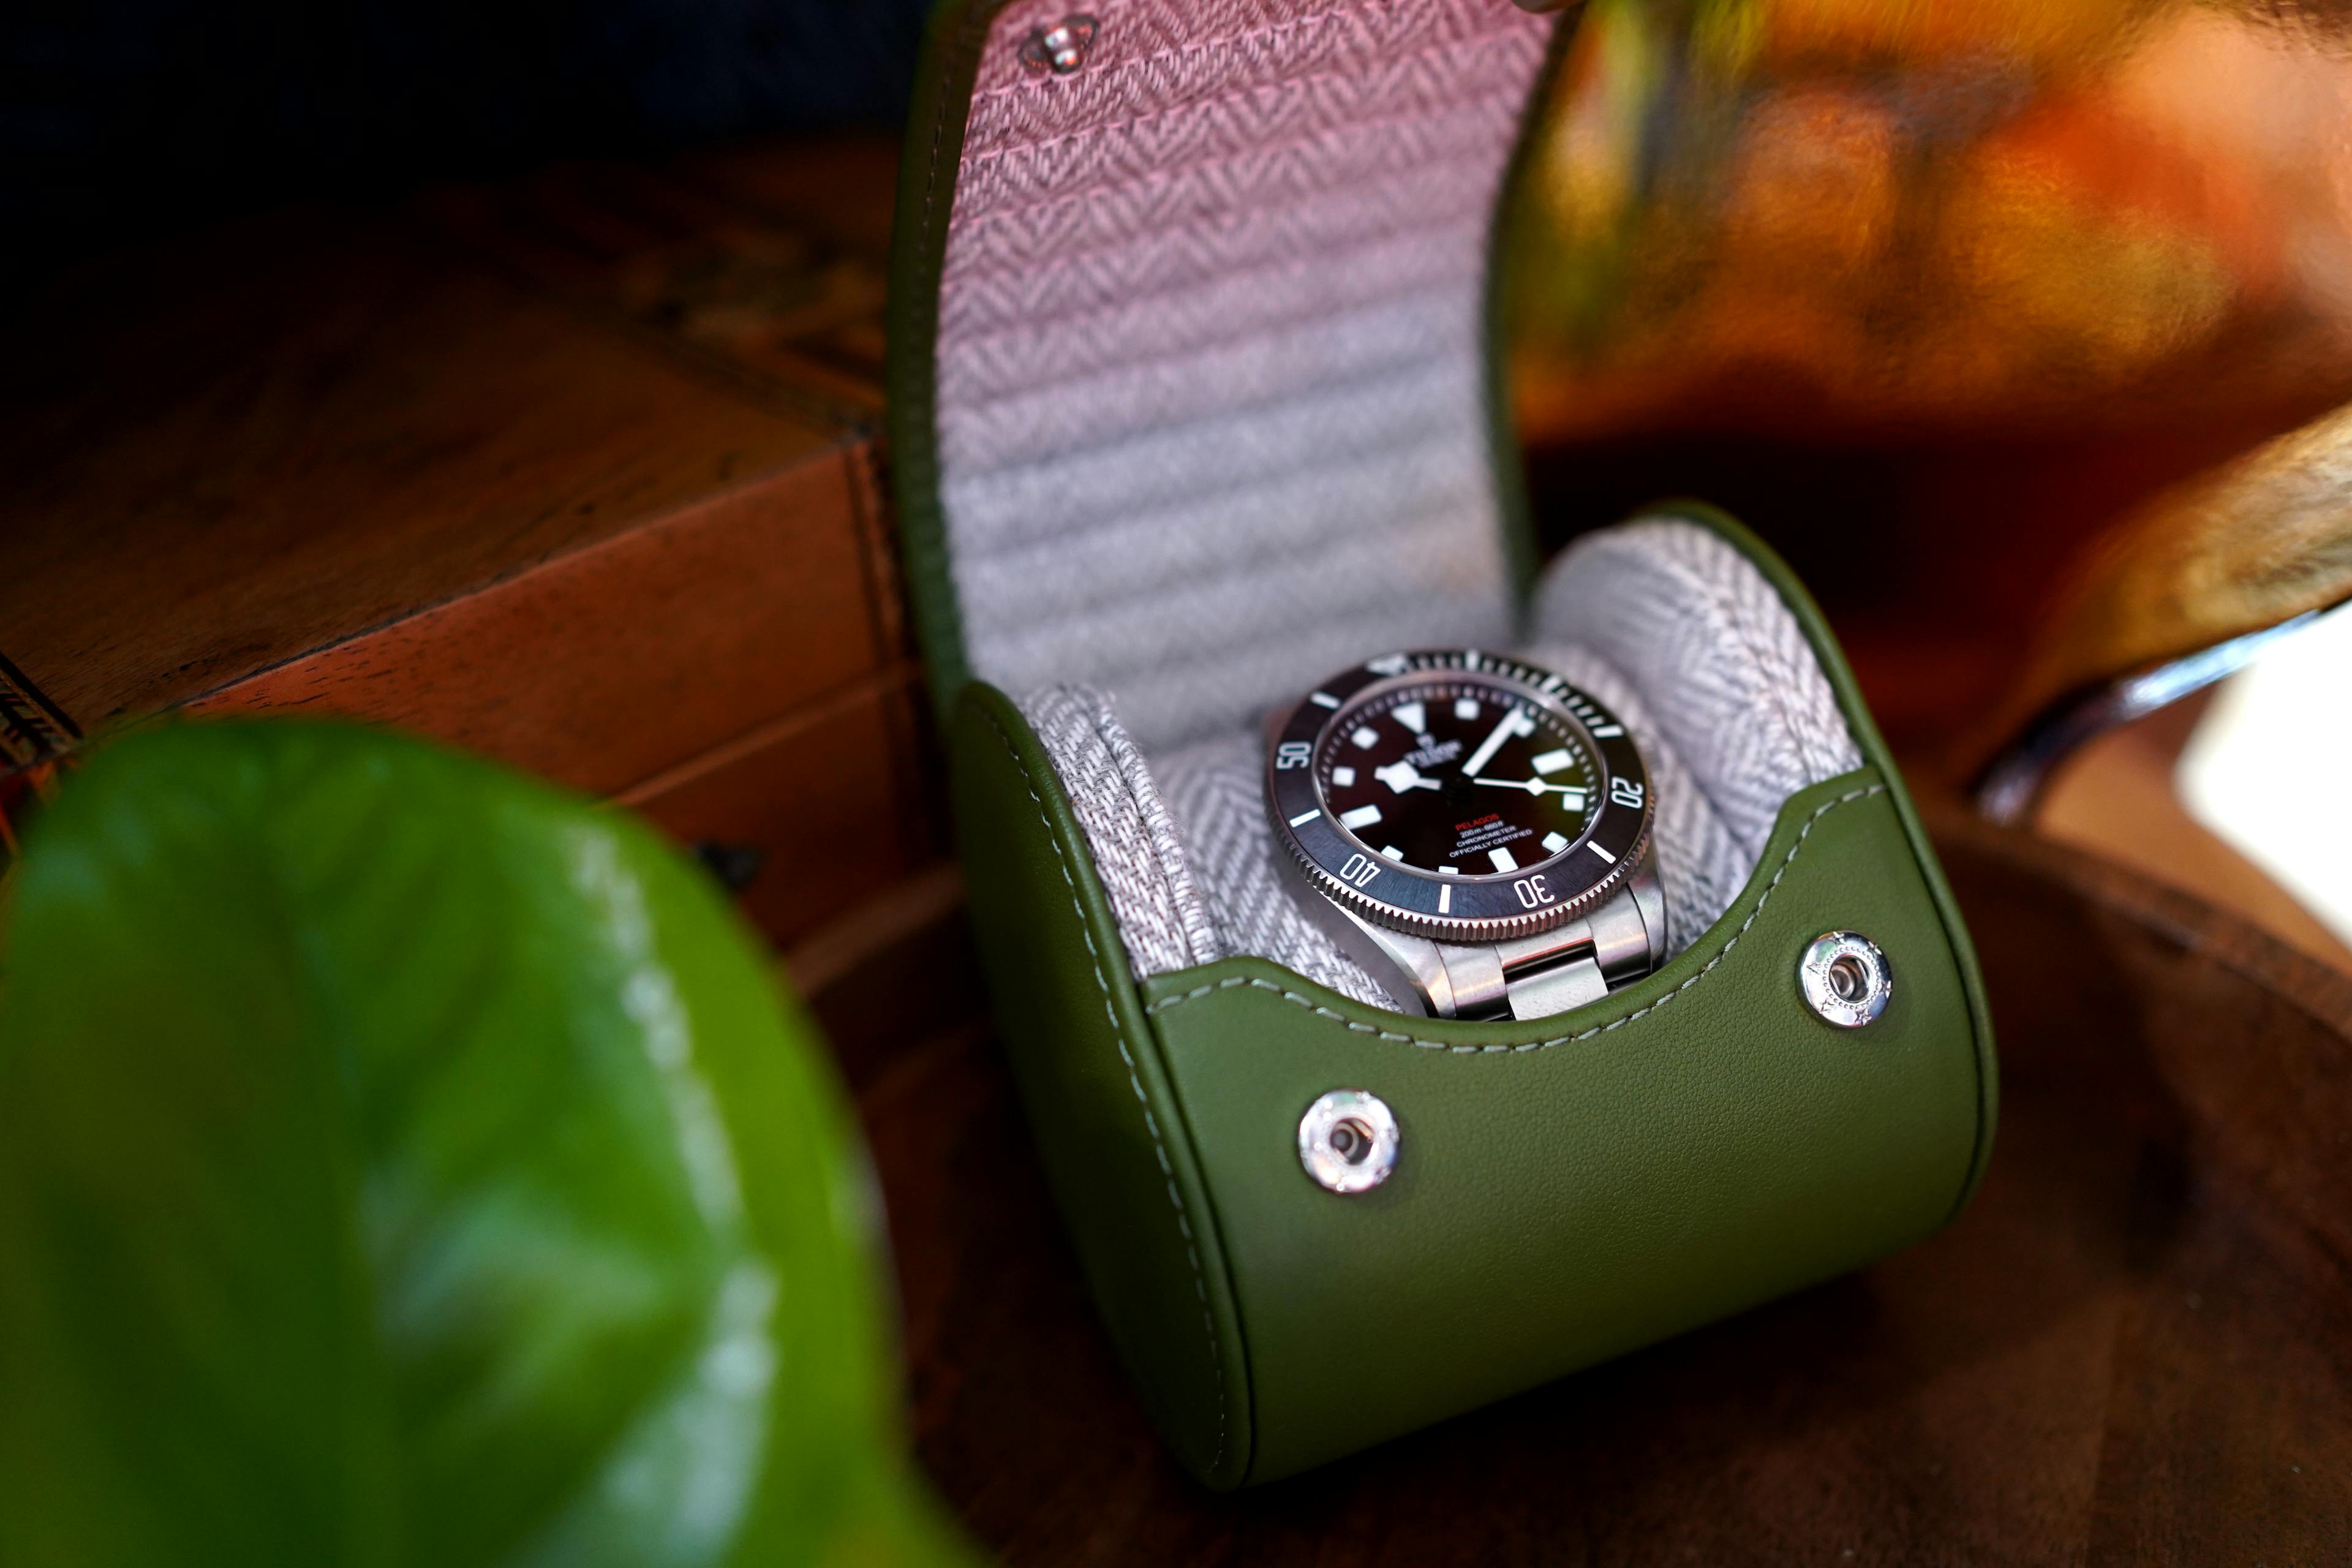 Introducing the Evergreen Luxury Watch Travel Roll – where timeless elegance meets impeccable craftsmanship. This exceptional case showcases a striking Green Leather exterior paired with a sophisticated Grey and White Chevron Patterned Interior, perfectly blending style and security for your cherished timepieces.

In this unique setting, envision our Evergreen case resting gracefully inside a cozy glamping teepee, surrounded by the rustic charm of the great outdoors. The lush green leather exterior embodies luxury, while the chevron patterned interior adds a touch of modern sophistication. Whether you're on a glamping adventure or simply seeking to protect your watches with utmost care, the Evergreen Luxury Watch Travel Roll is your ideal companion.

Explore a world where your watches travel in impeccable style, whether under the stars or in the comfort of your teepee, safe in the knowledge that every detail has been considered. Discover the essence of luxury and protection with our Evergreen case, redefining watch storage for the modern adventurer.